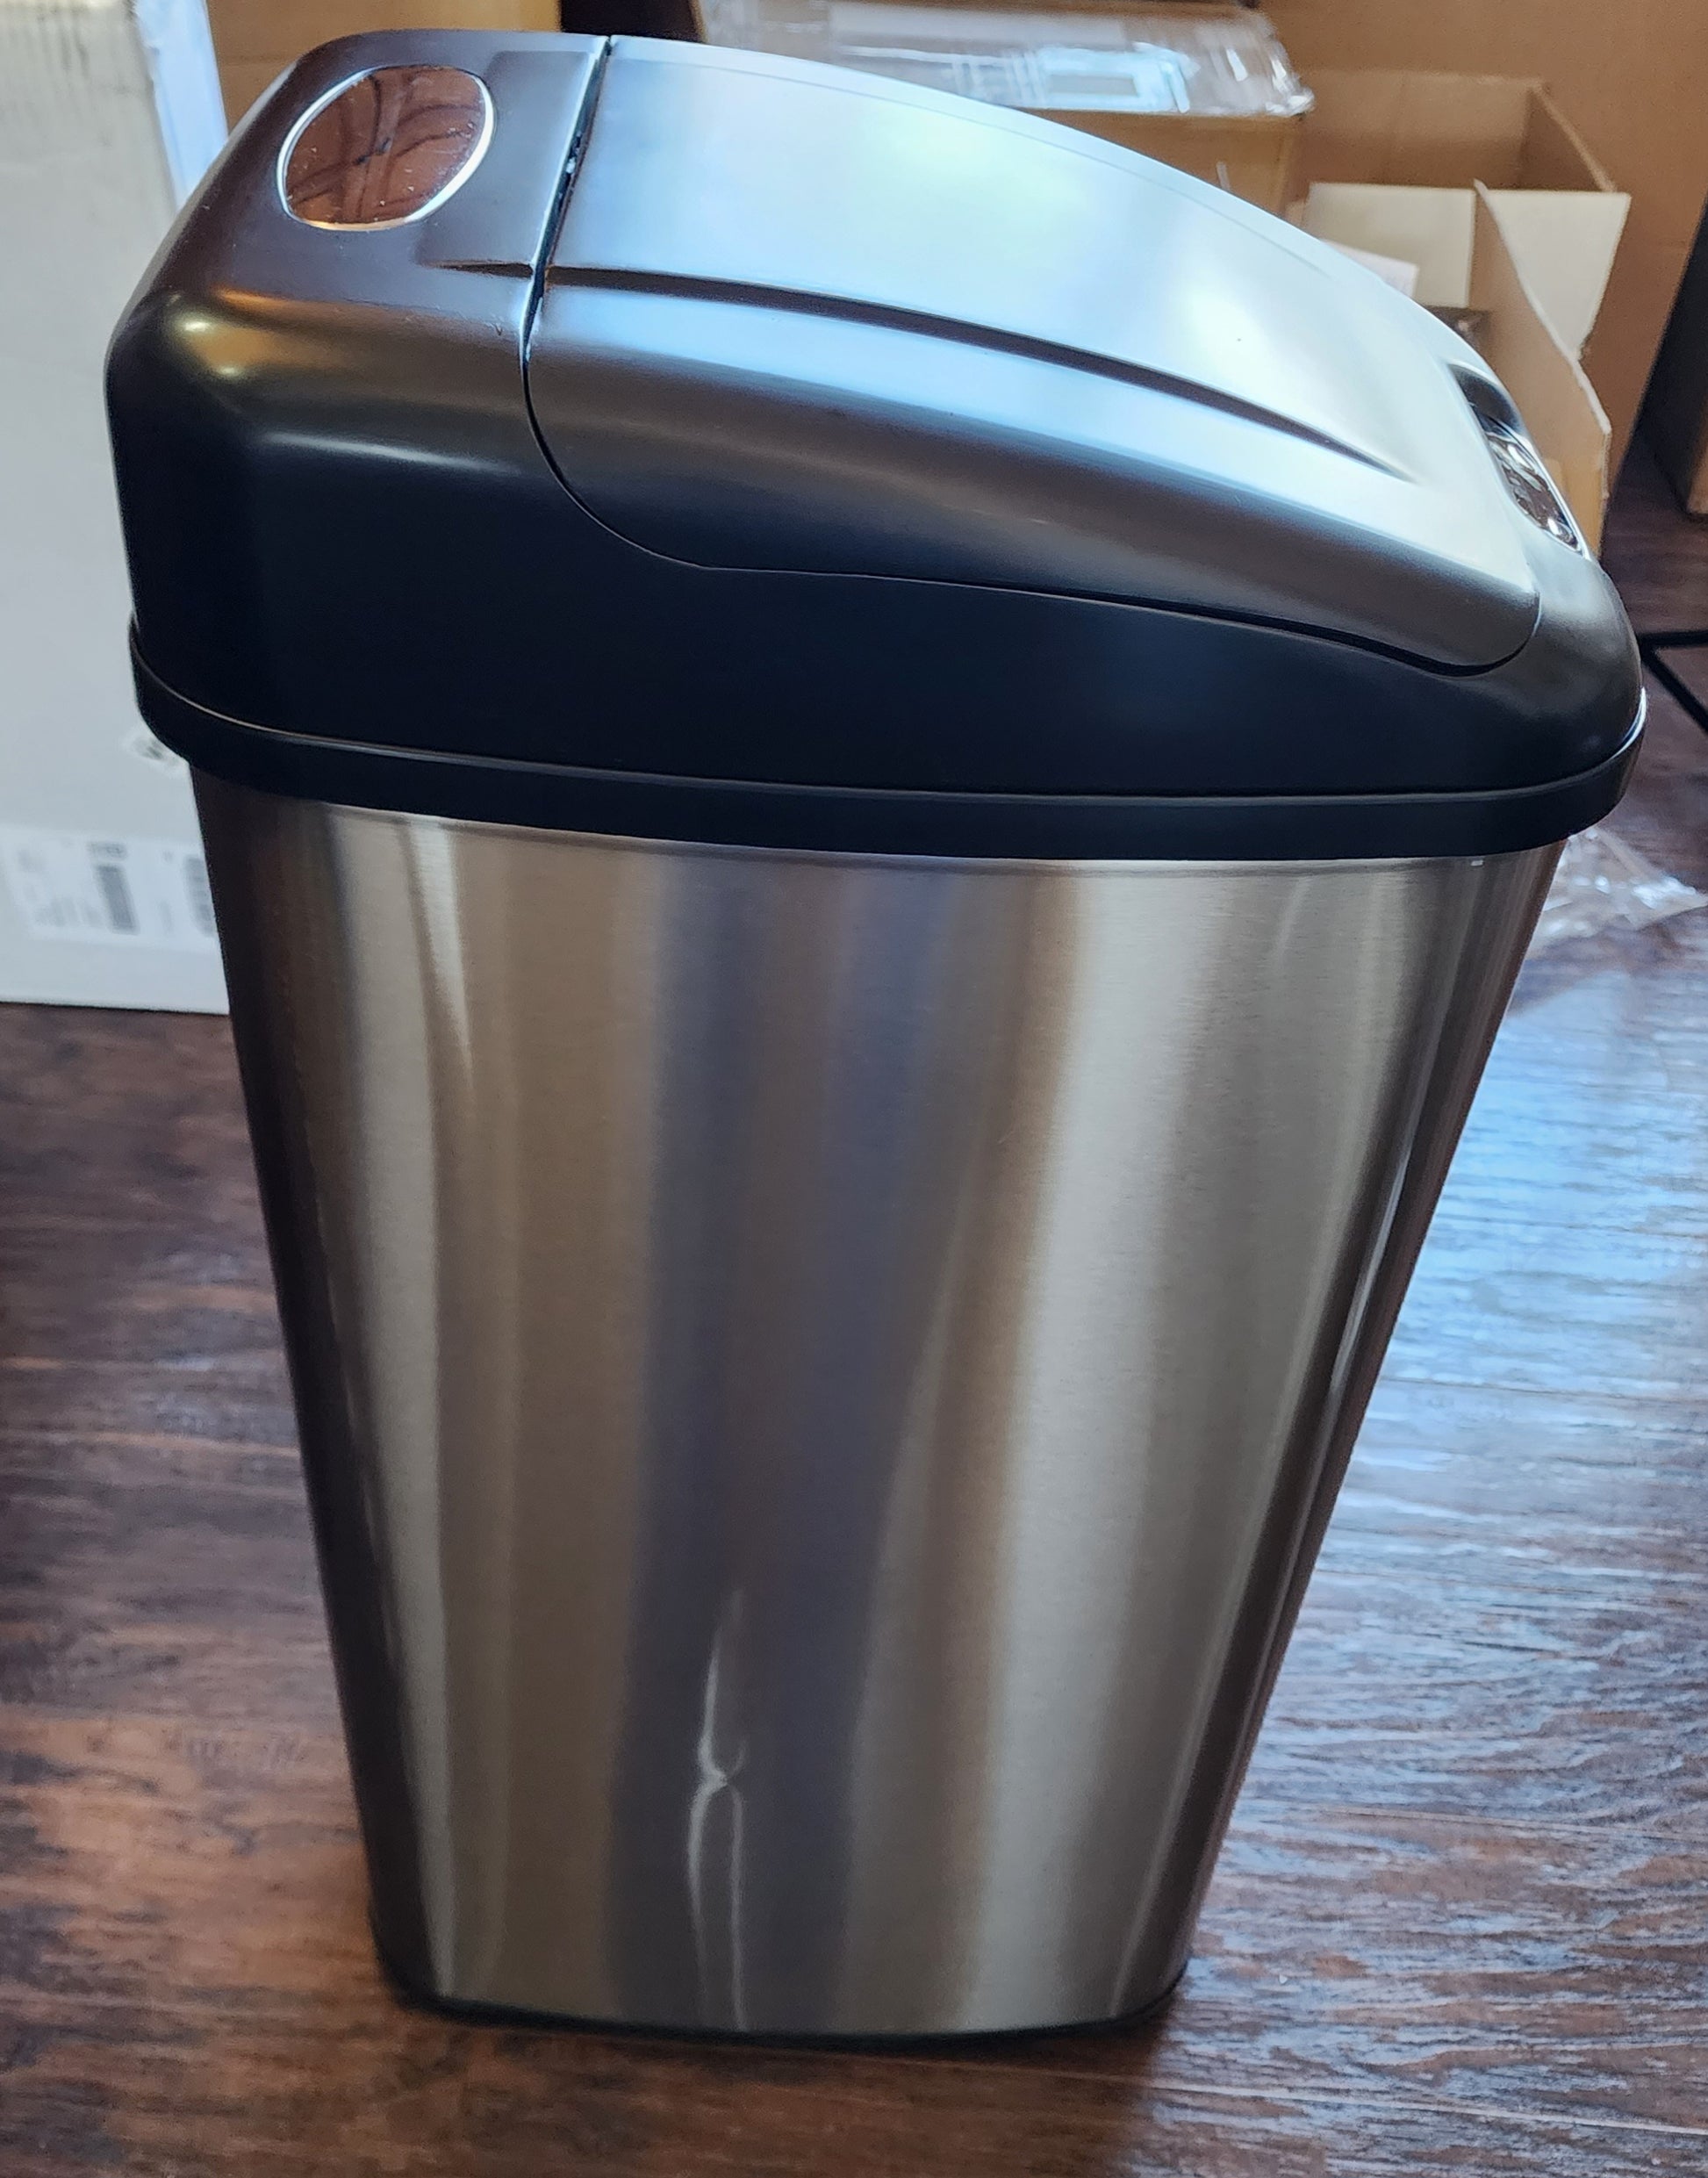 Stainless Steel 13 Gallon Touchless Kitchen Trash Can - Silver